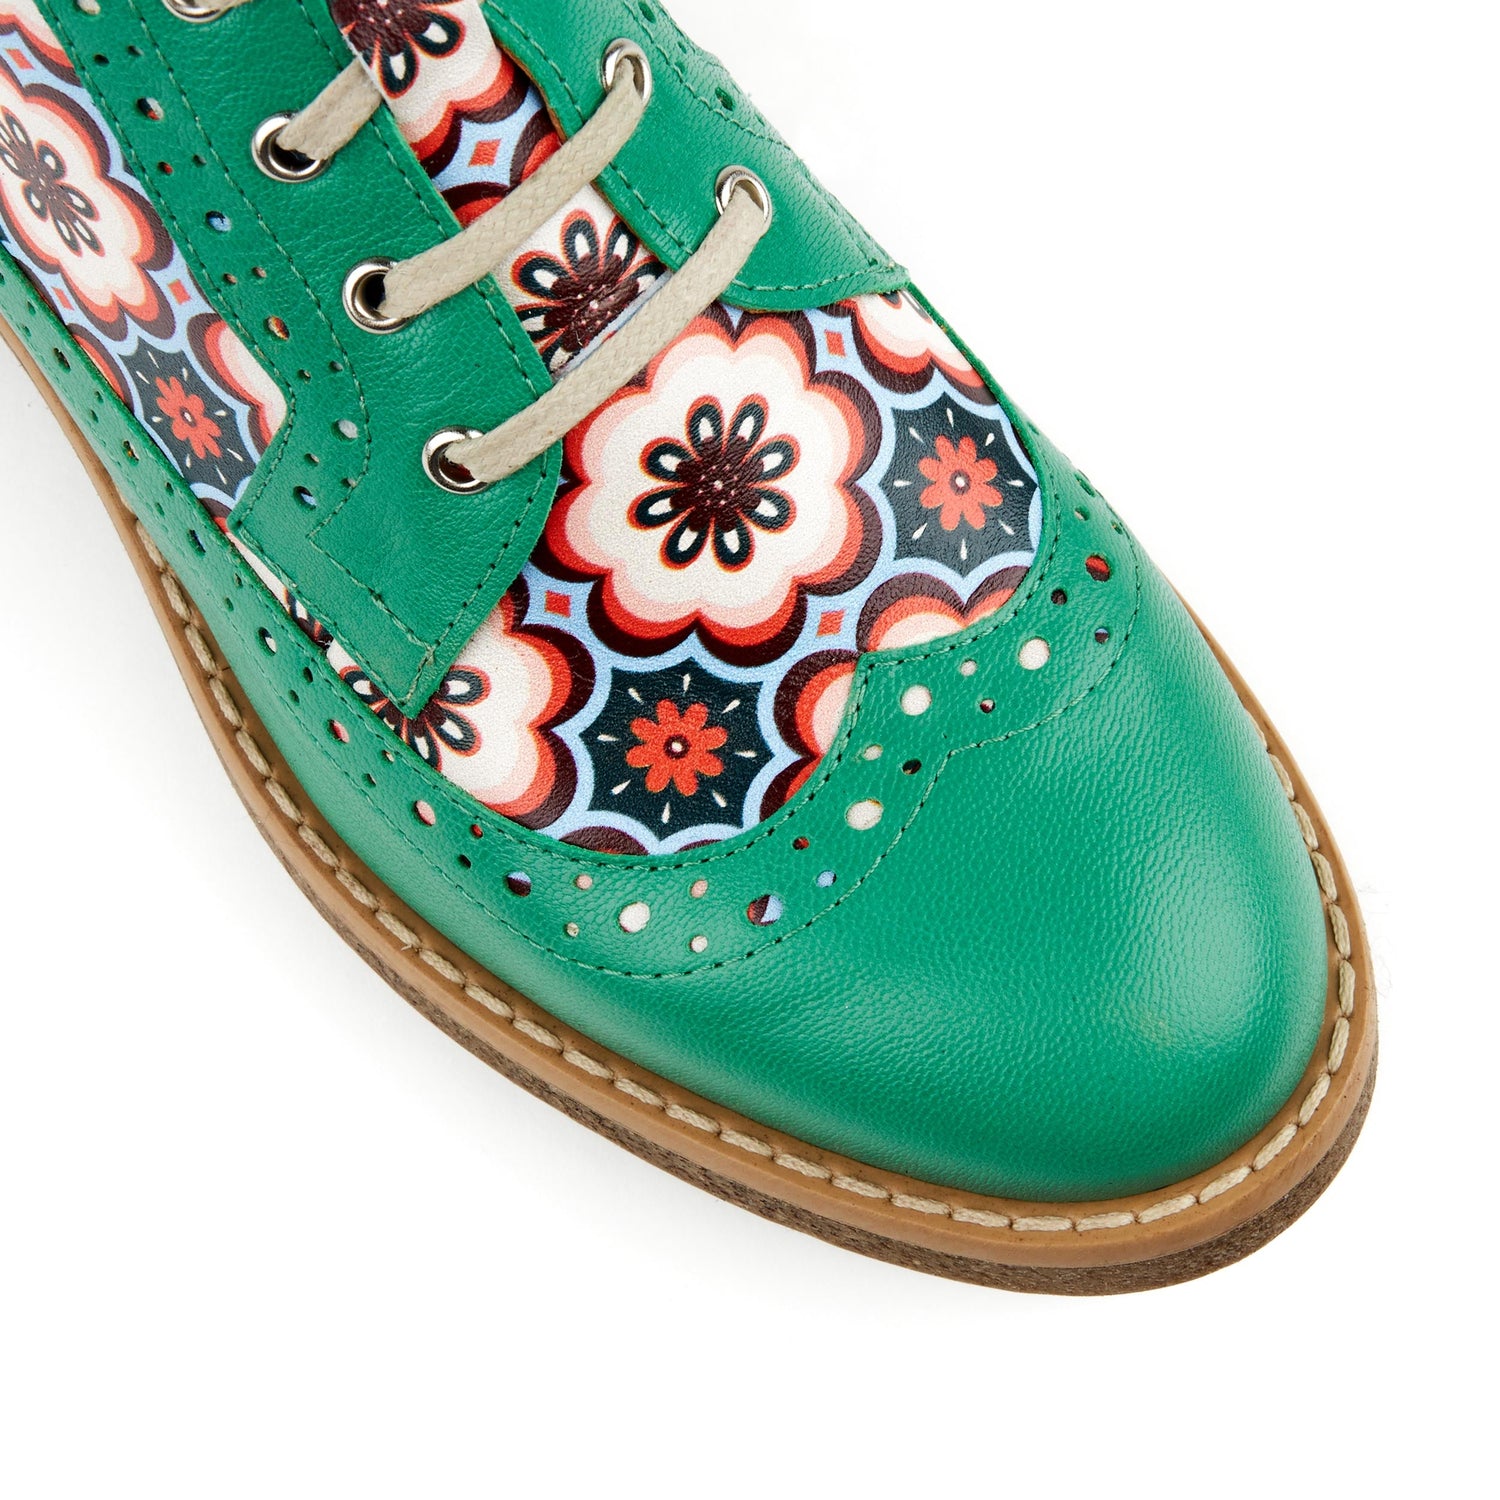 Hatter - Daisy Chain Green & Yellow Ankle Boots Embassy London 